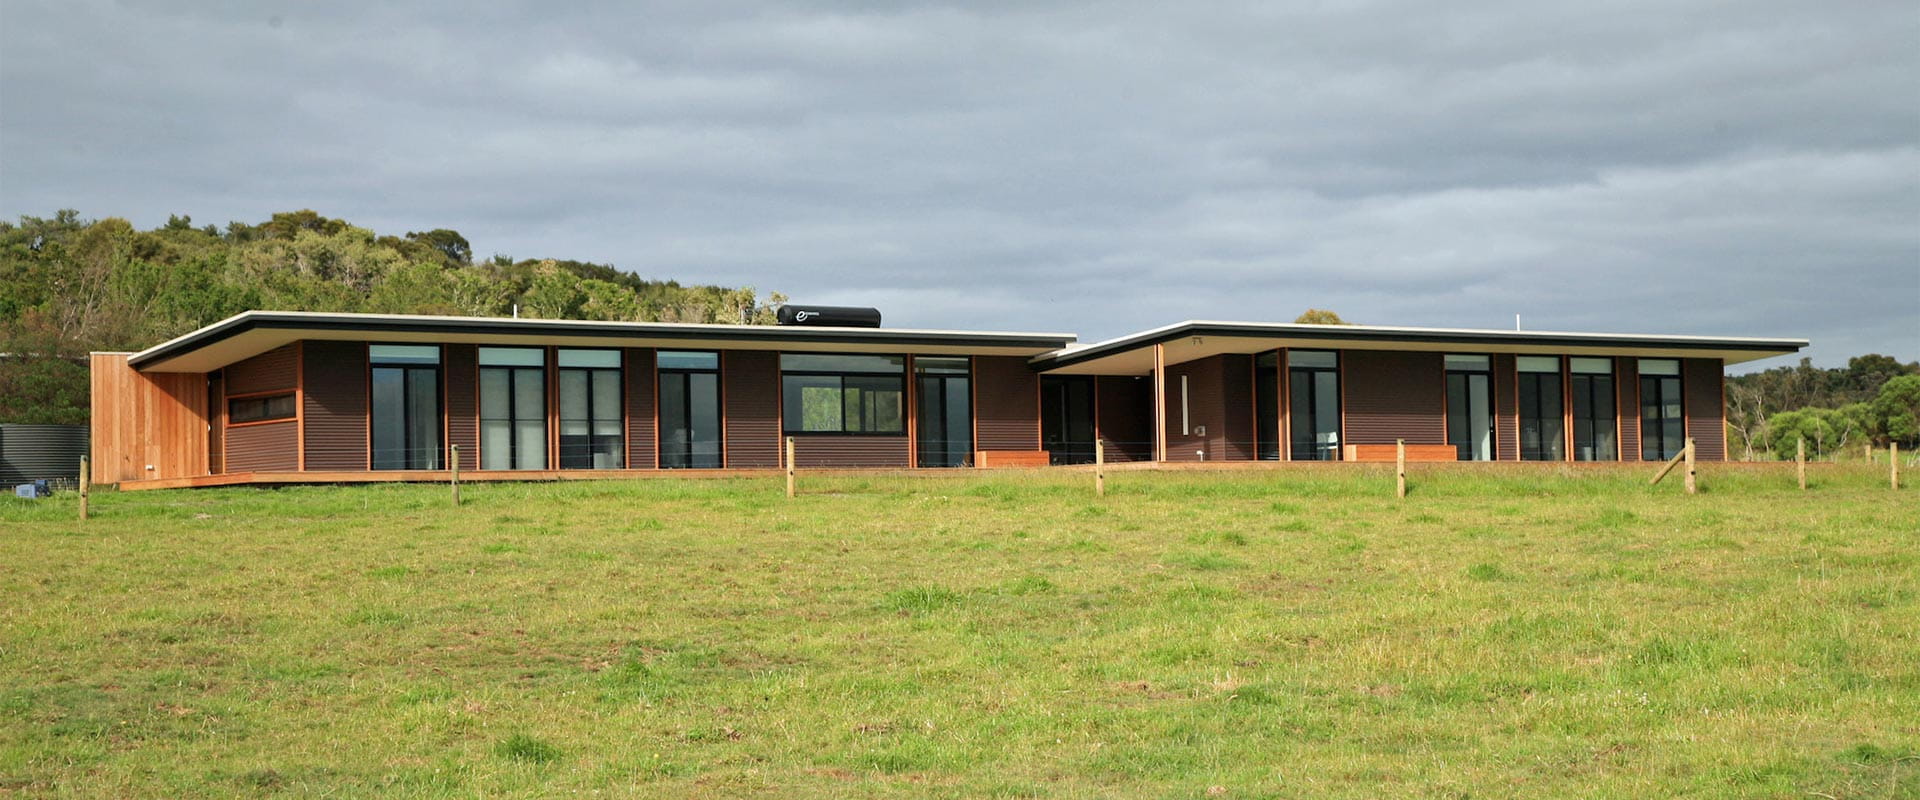 Outside view of a large accommodation building, Just Inside the Gate, at Wilsons Promontory National Park.